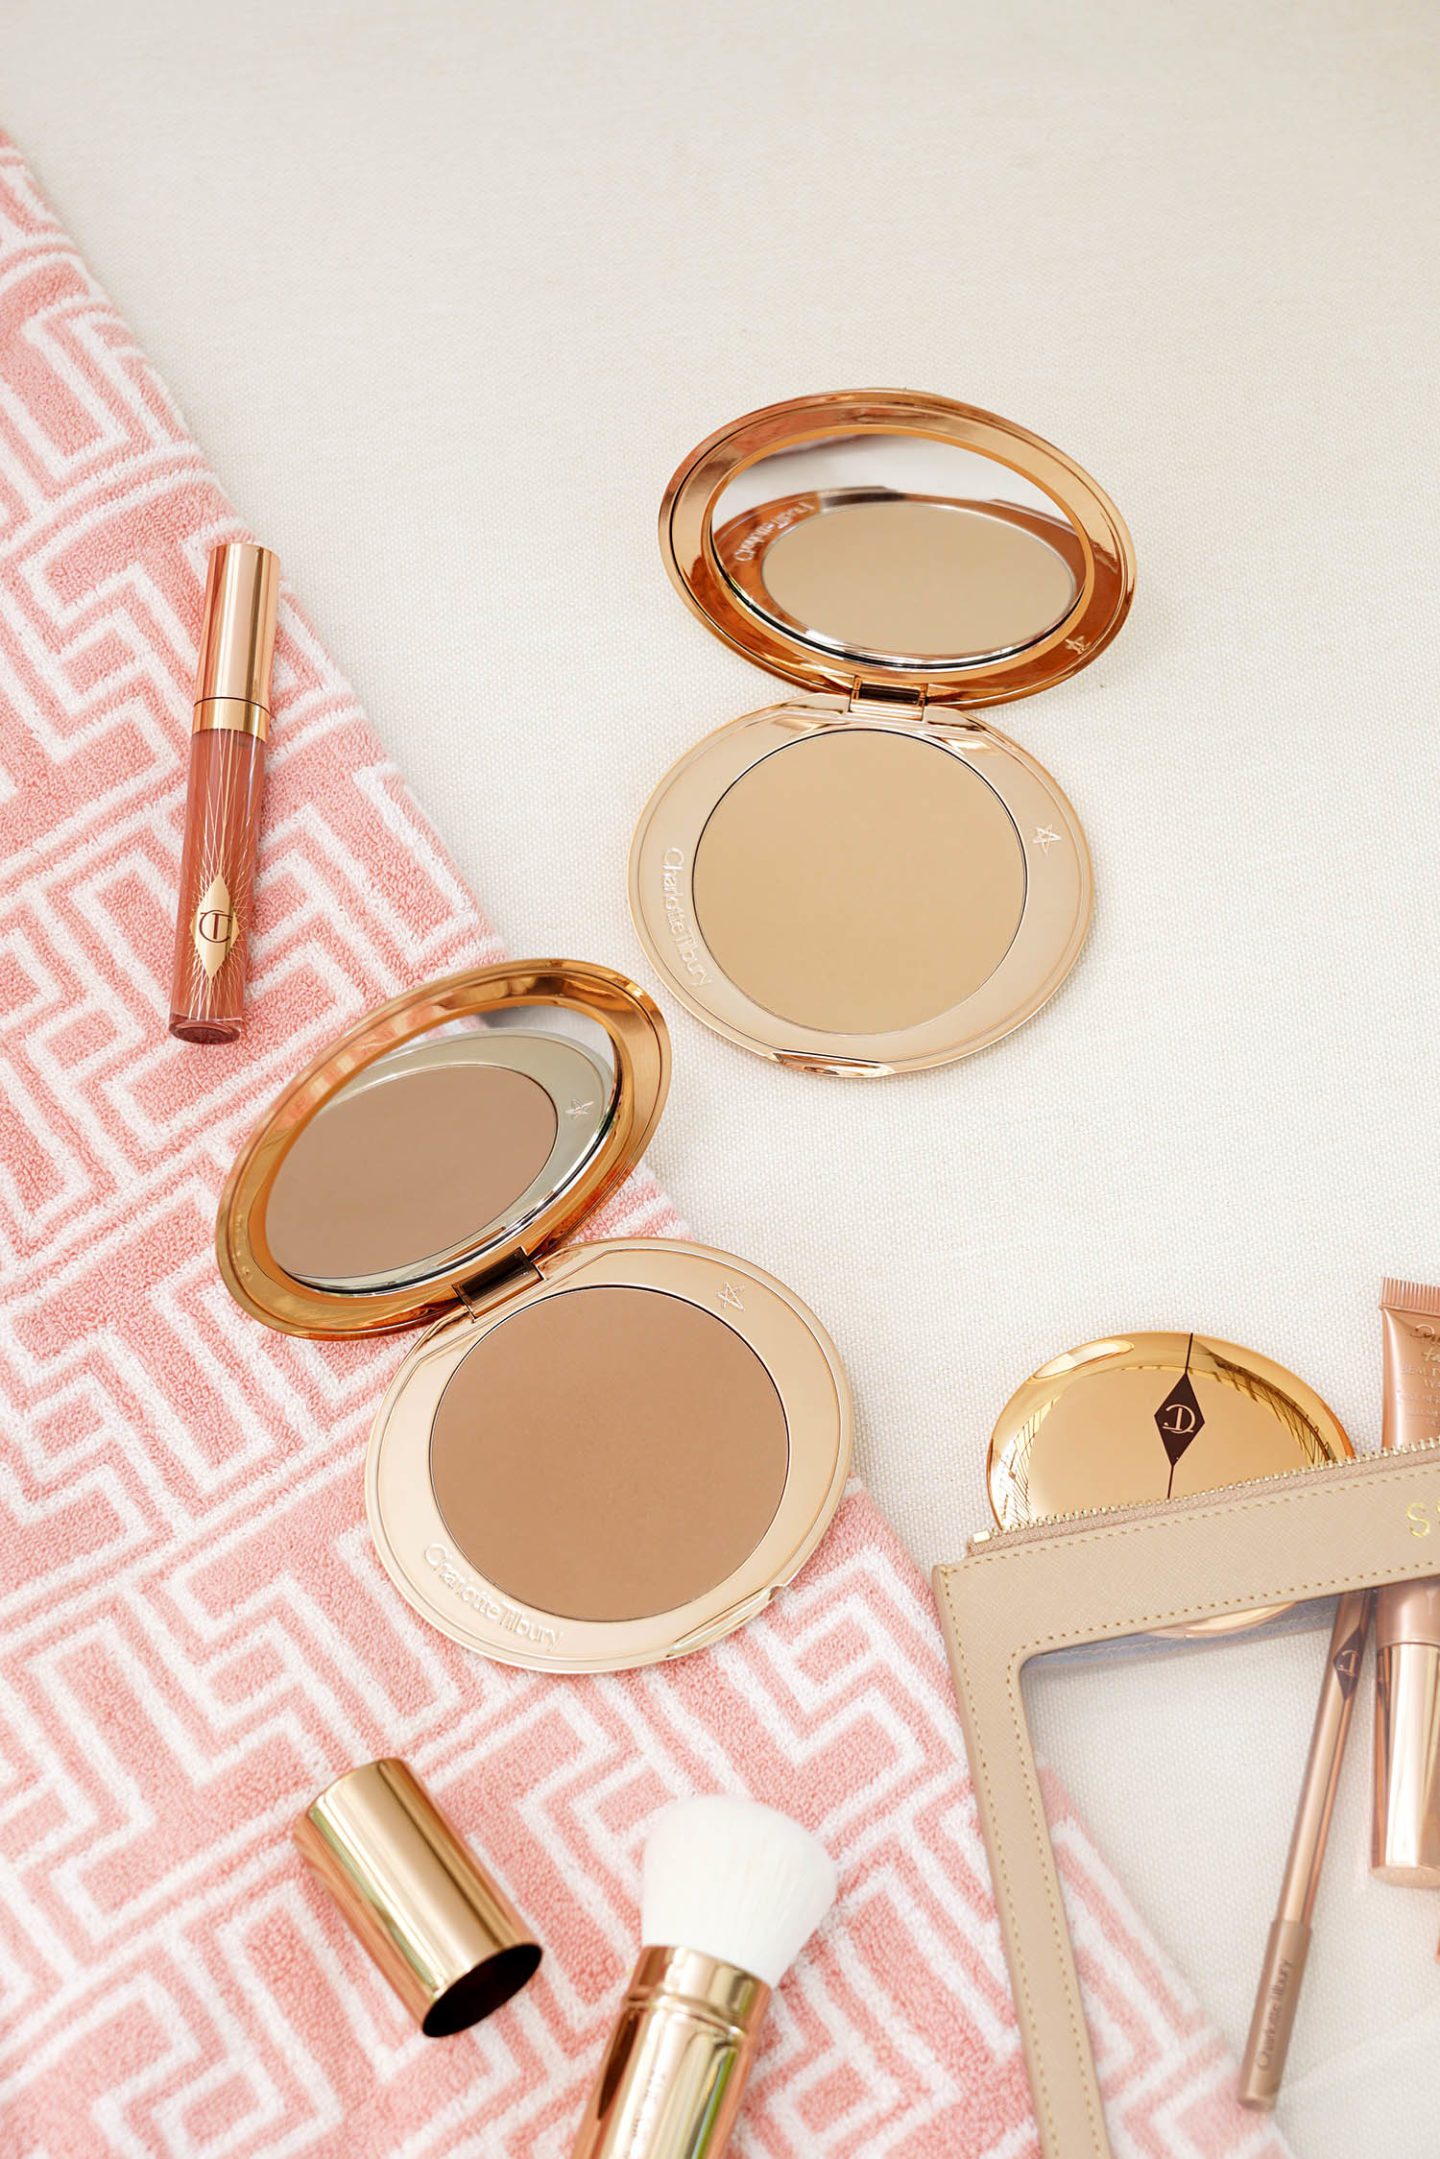 Charlotte Tilbury Airbrush Bronzer in Fair and Medium | The Beauty Look Book